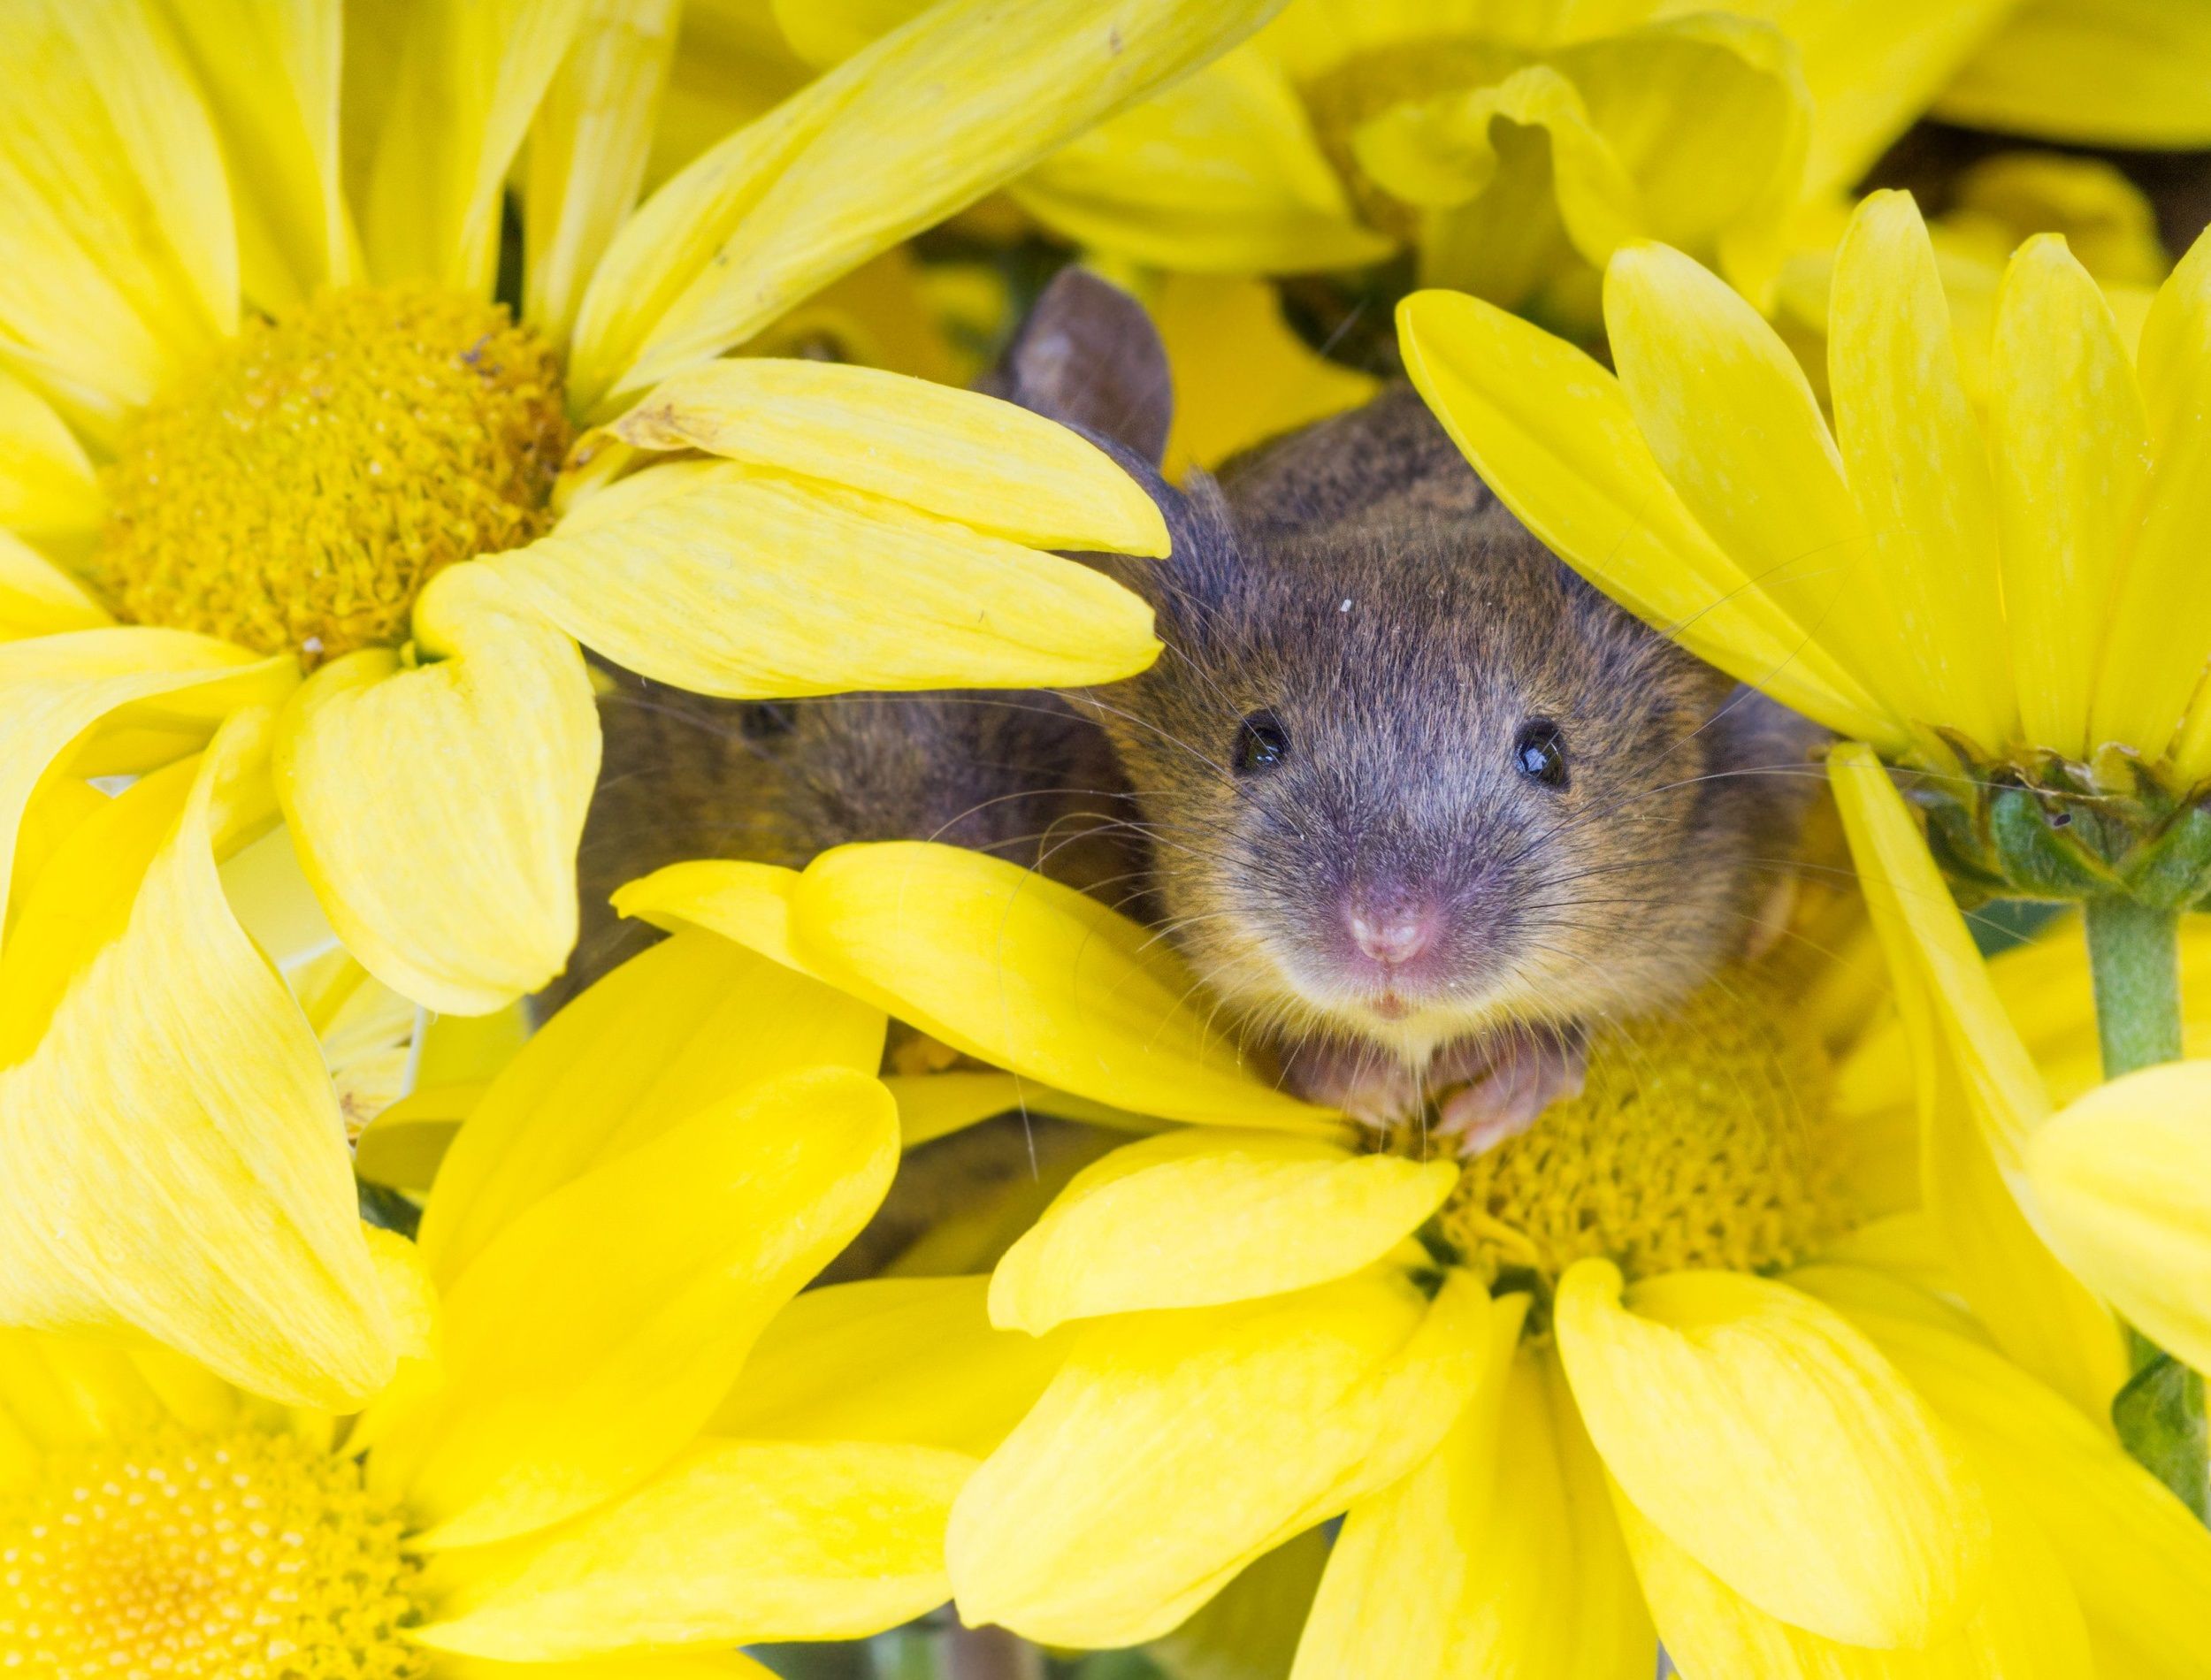 Common house mouse (Mus musculus) in flowers yellow chrysanthemums